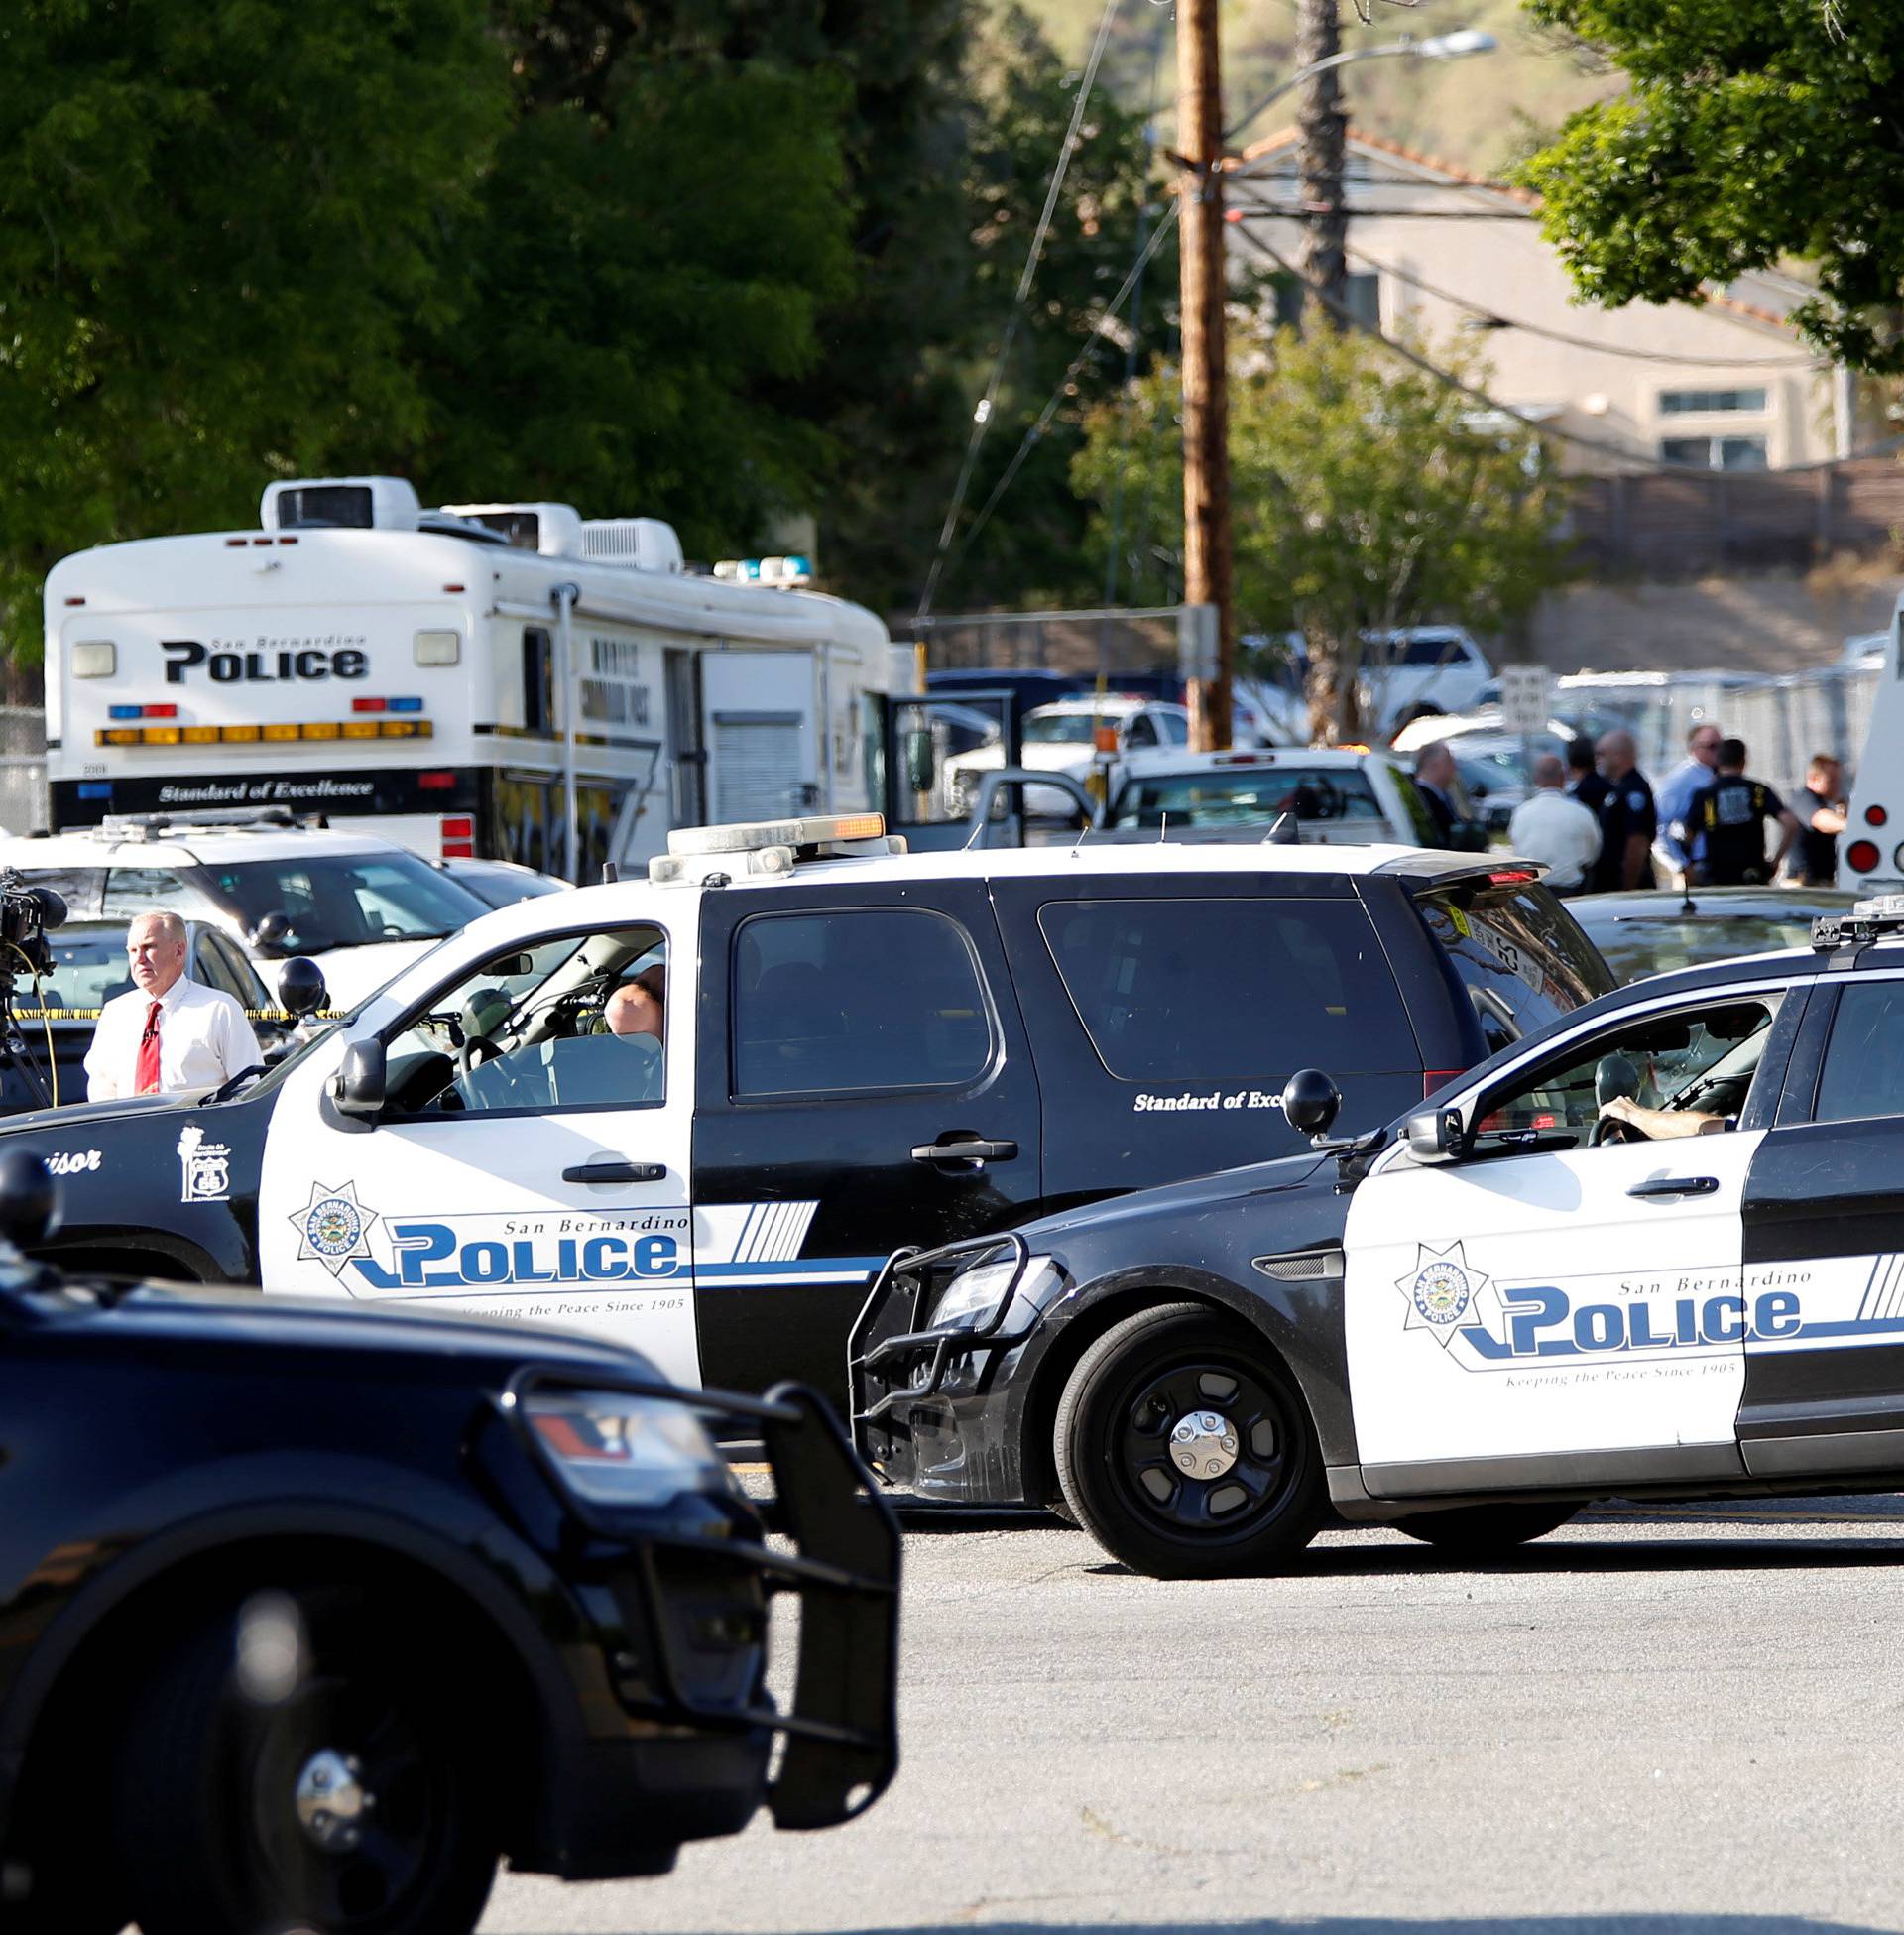 Police vehicles are pictured after a shooting at North Park Elementary School in San Bernardino